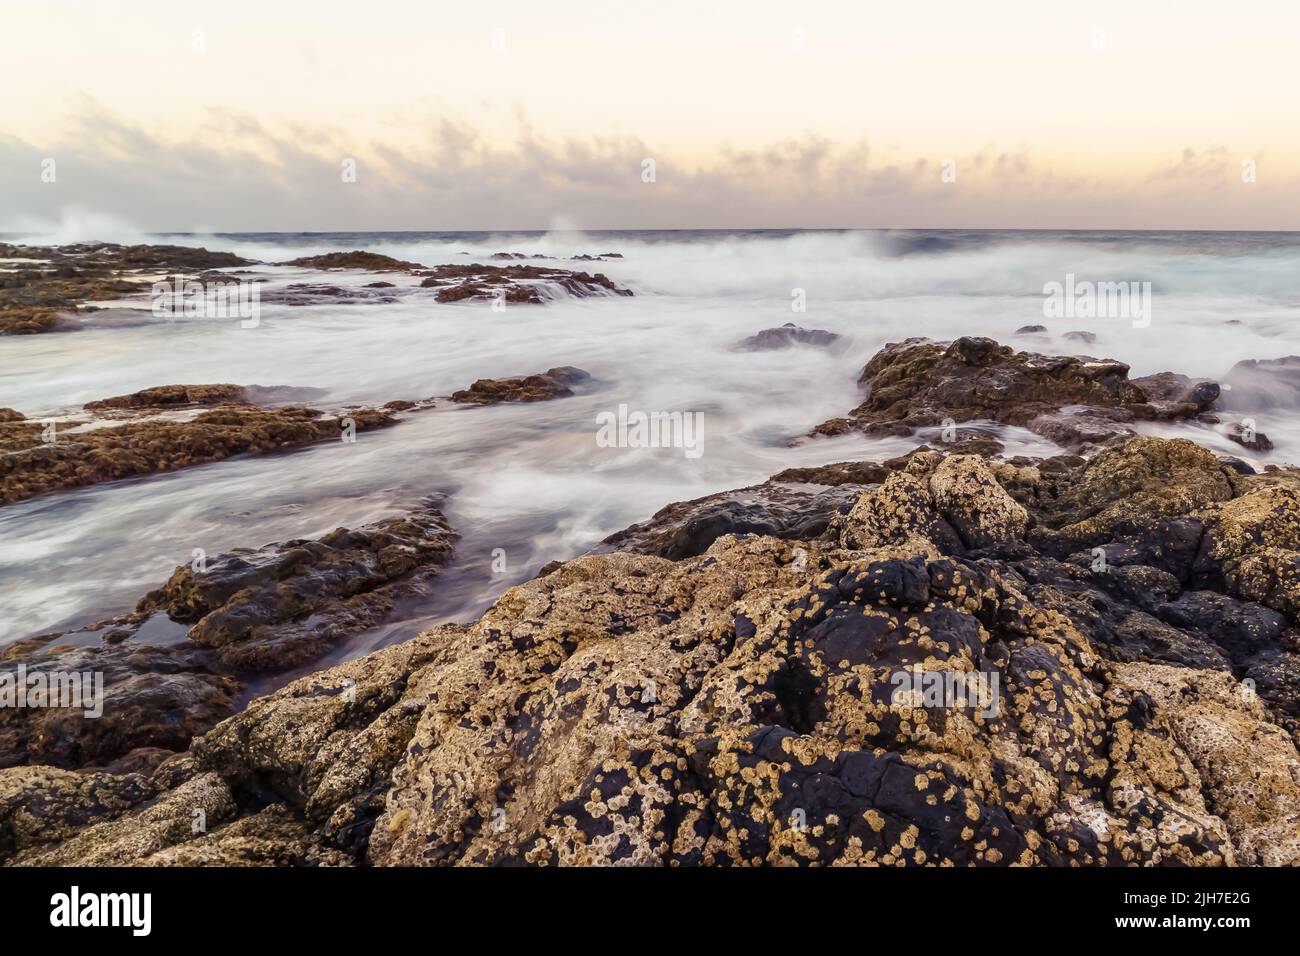 Landscape of the sea coast with water between the rocks, waves crashing against the rocks and reflections of the sky. Gran Canaria. Spain Stock Photo